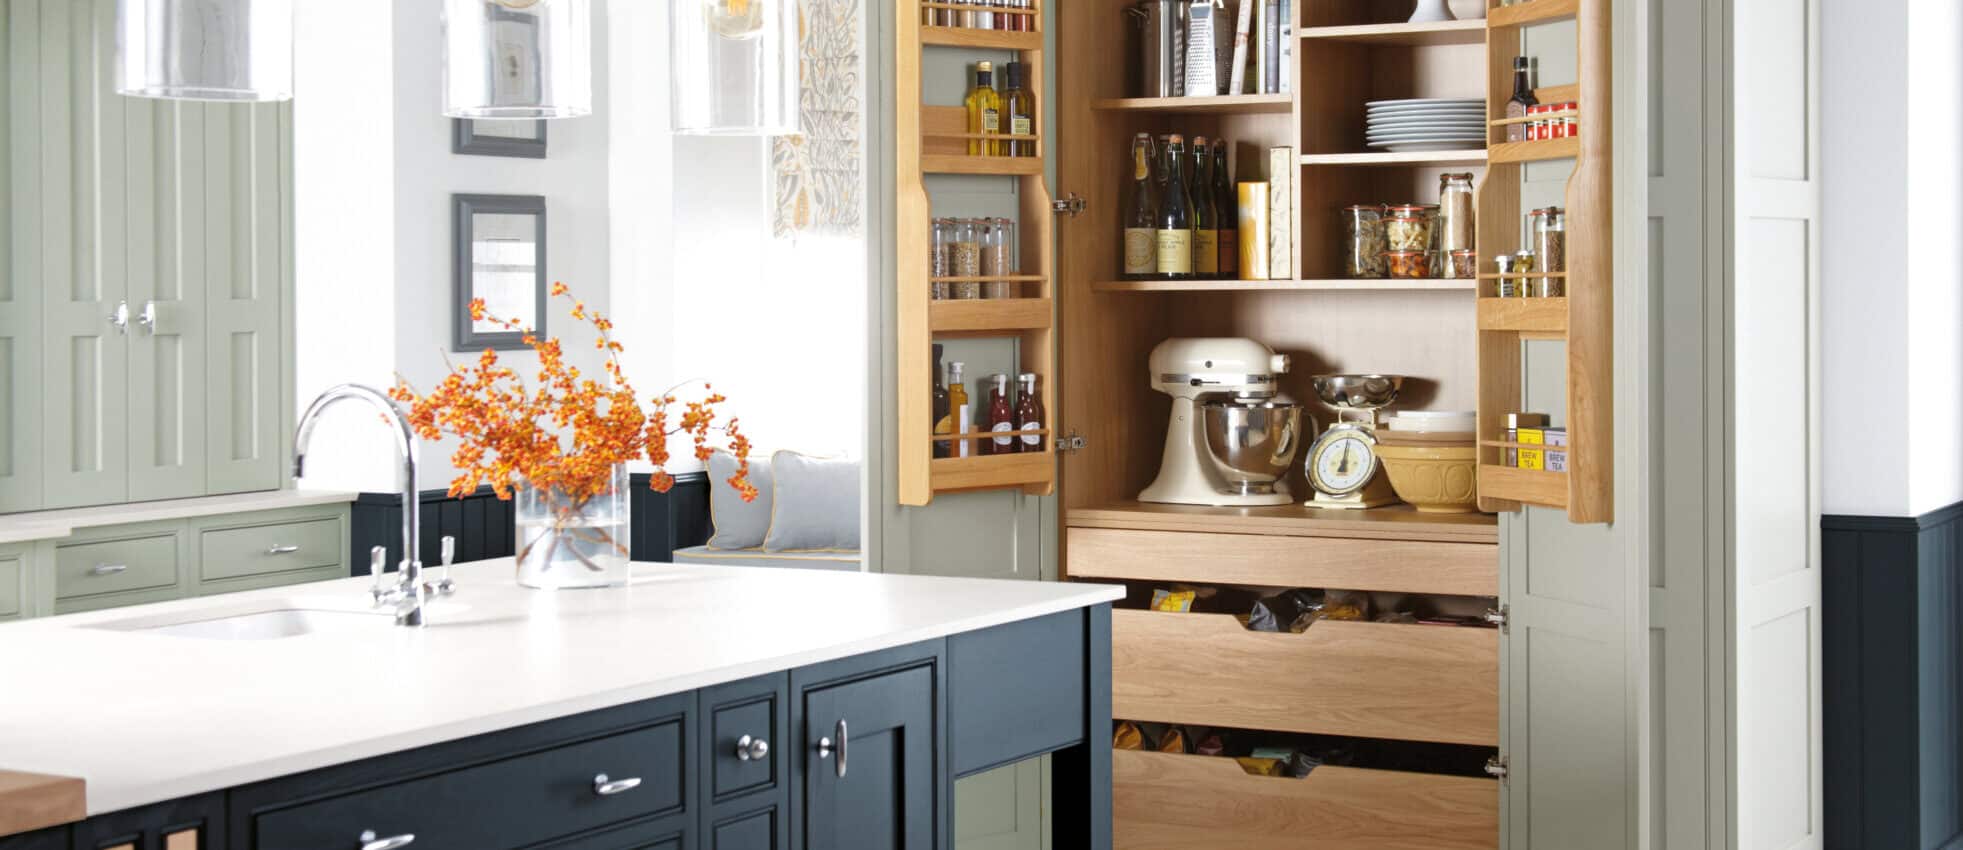 Shaker-Style In-Frame Kitchen with Beaded Frame in Space and Sea Salt